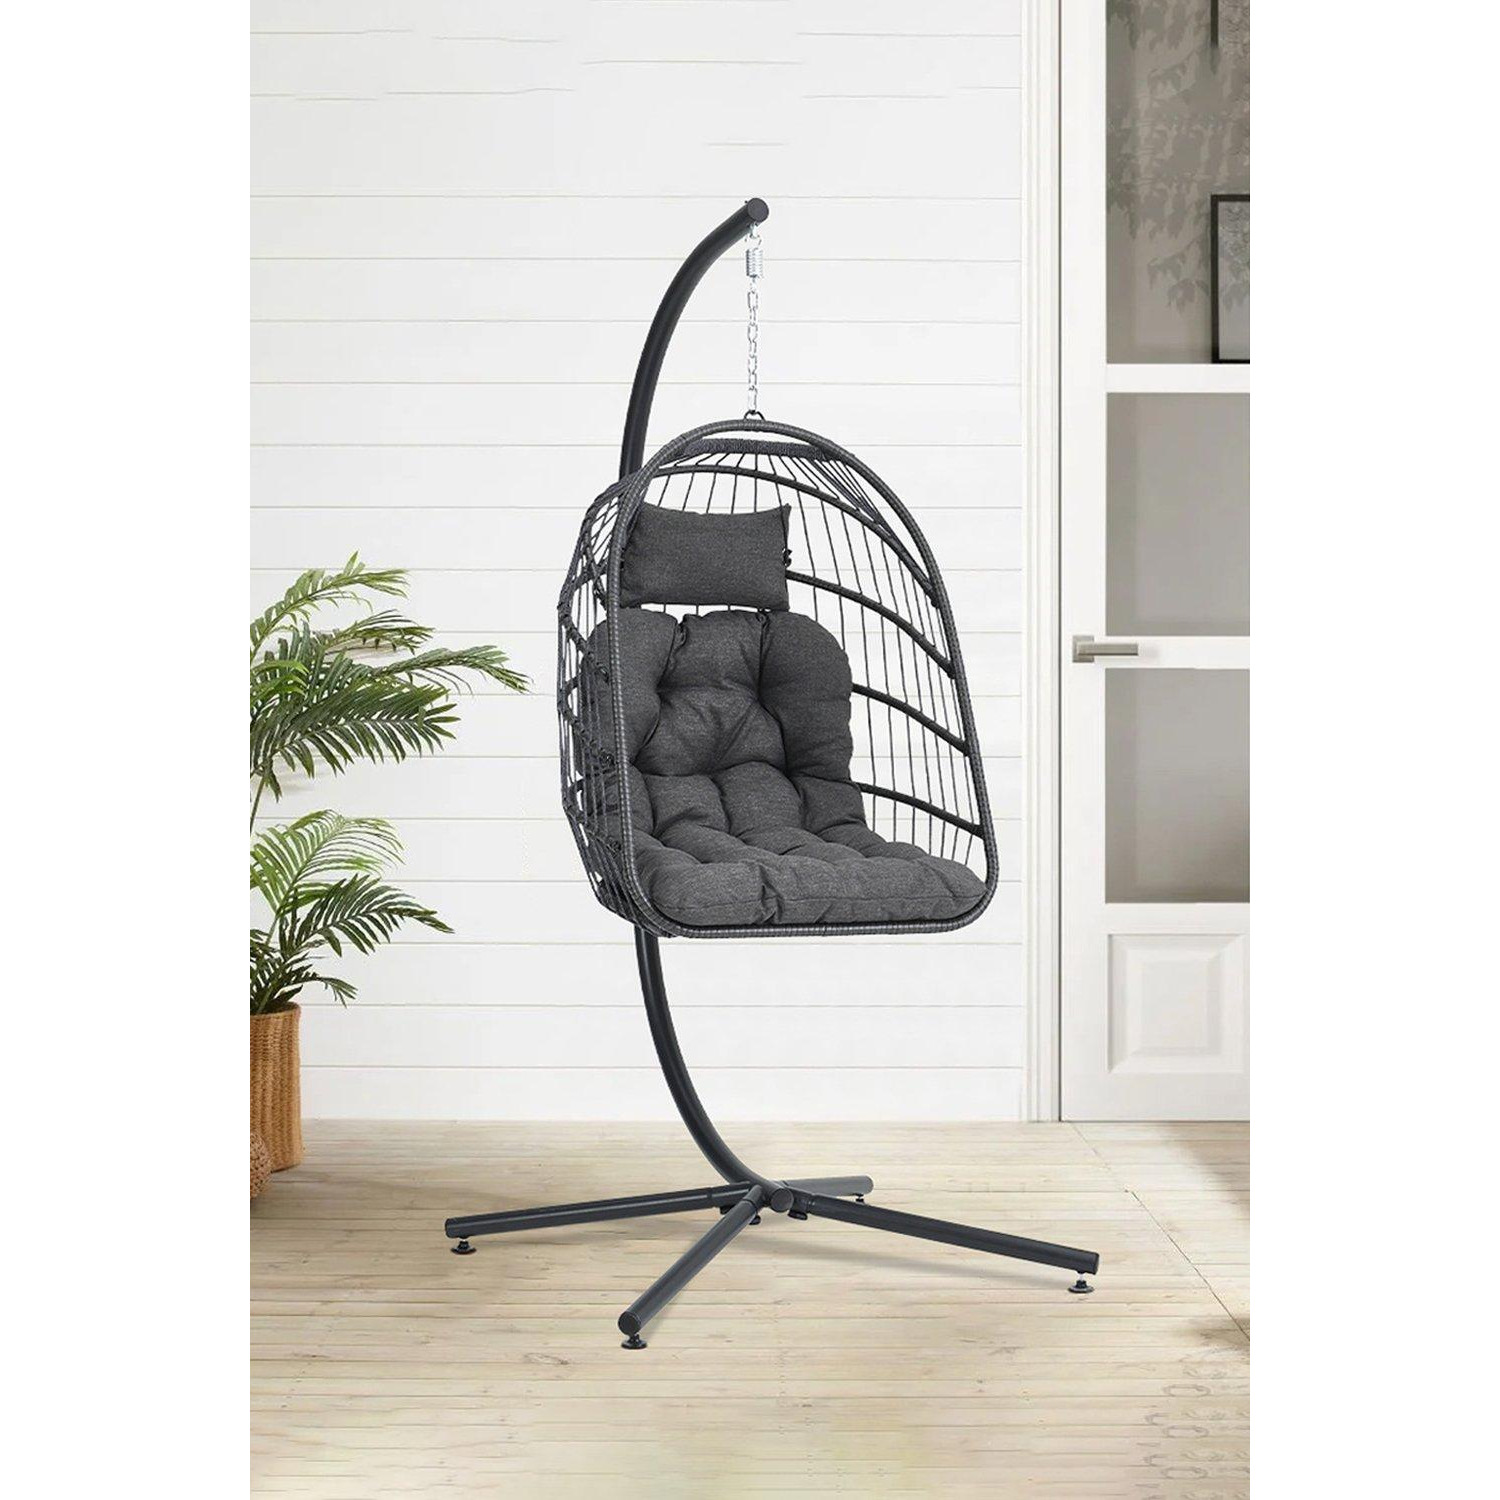 Hanging Chair with Stand and Cushion - image 1